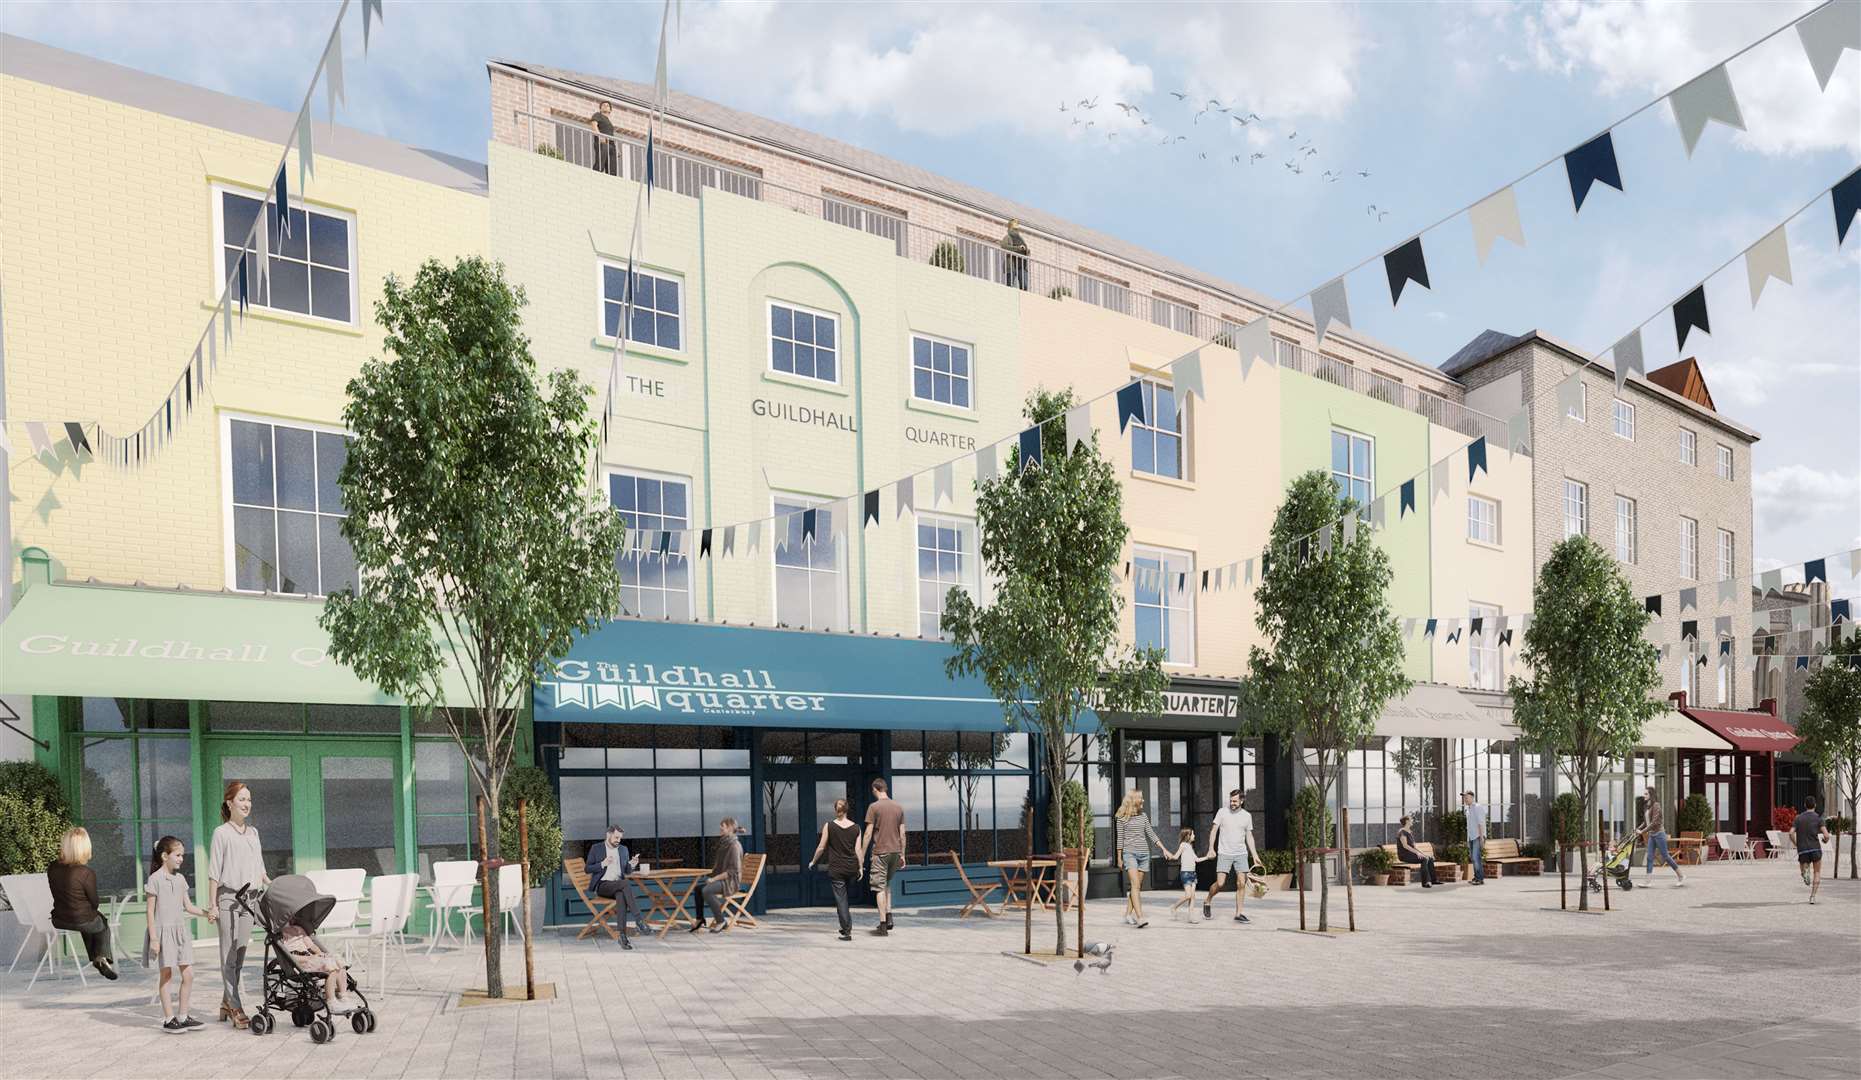 The vision for Debenhams in Guildhall Street, Canterbury